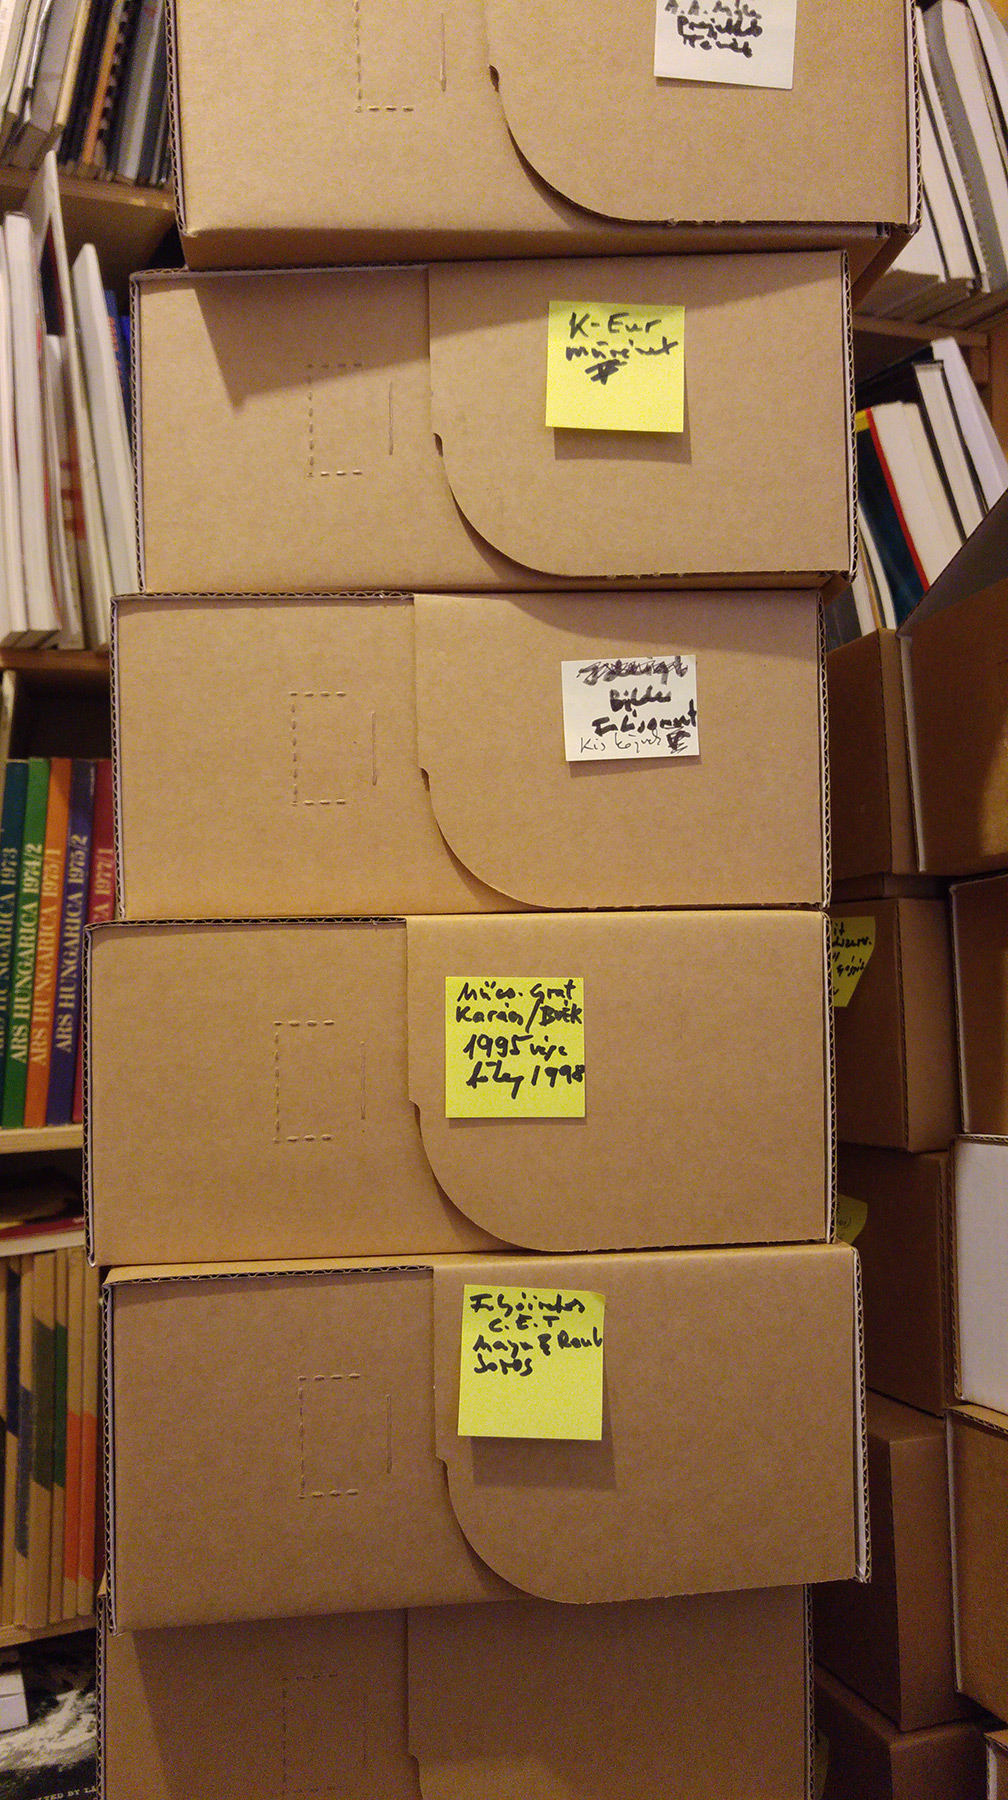 Part of the archive is ready to be transported.